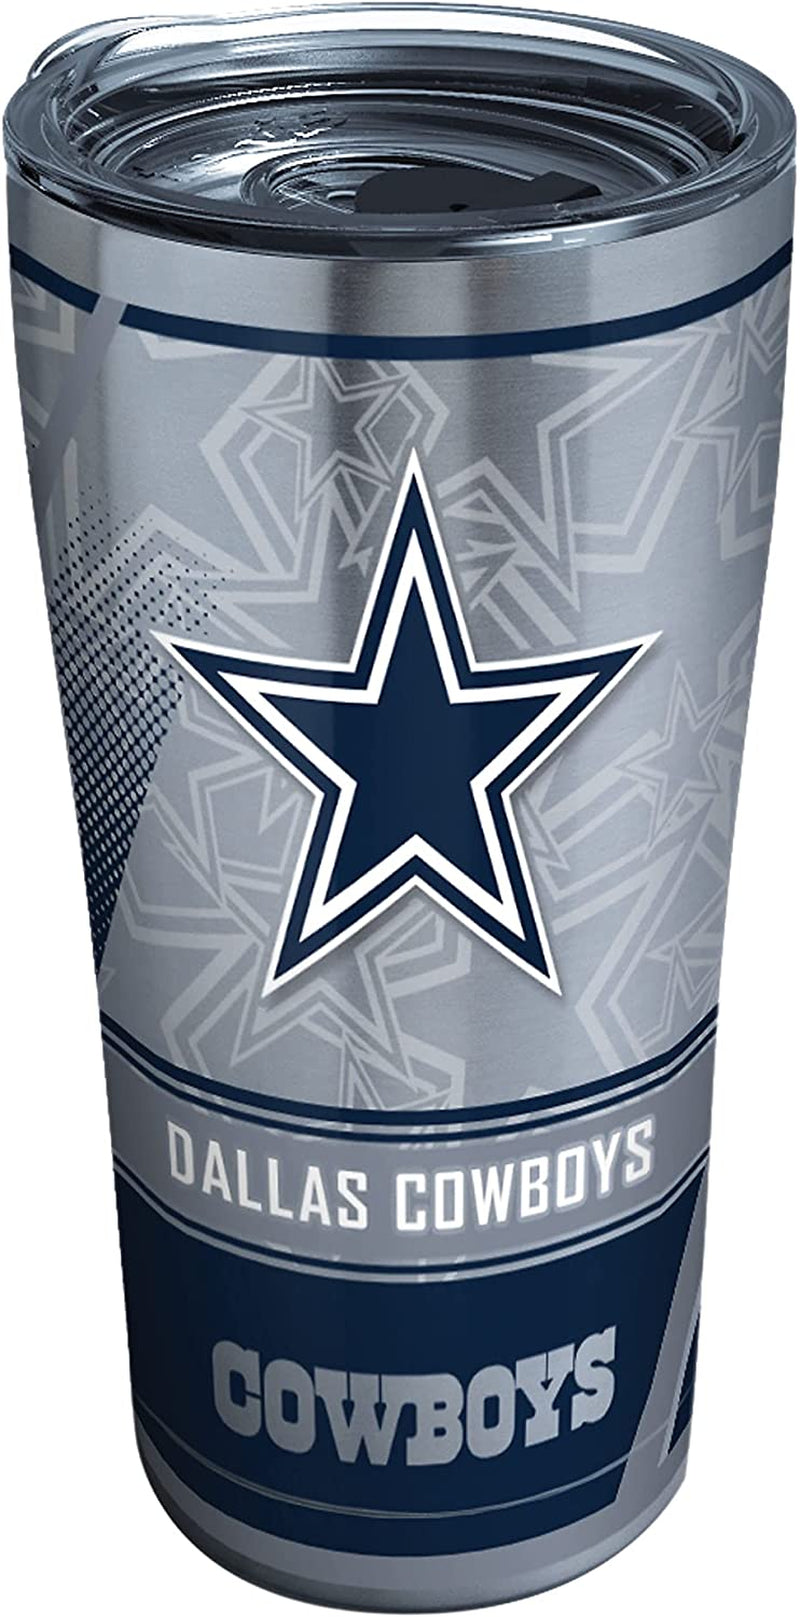 Tervis Triple Walled NFL Dallas Cowboys Edge Insulated Tumbler Cup Keeps Drinks Cold & Hot, 20Oz, Stainless Steel